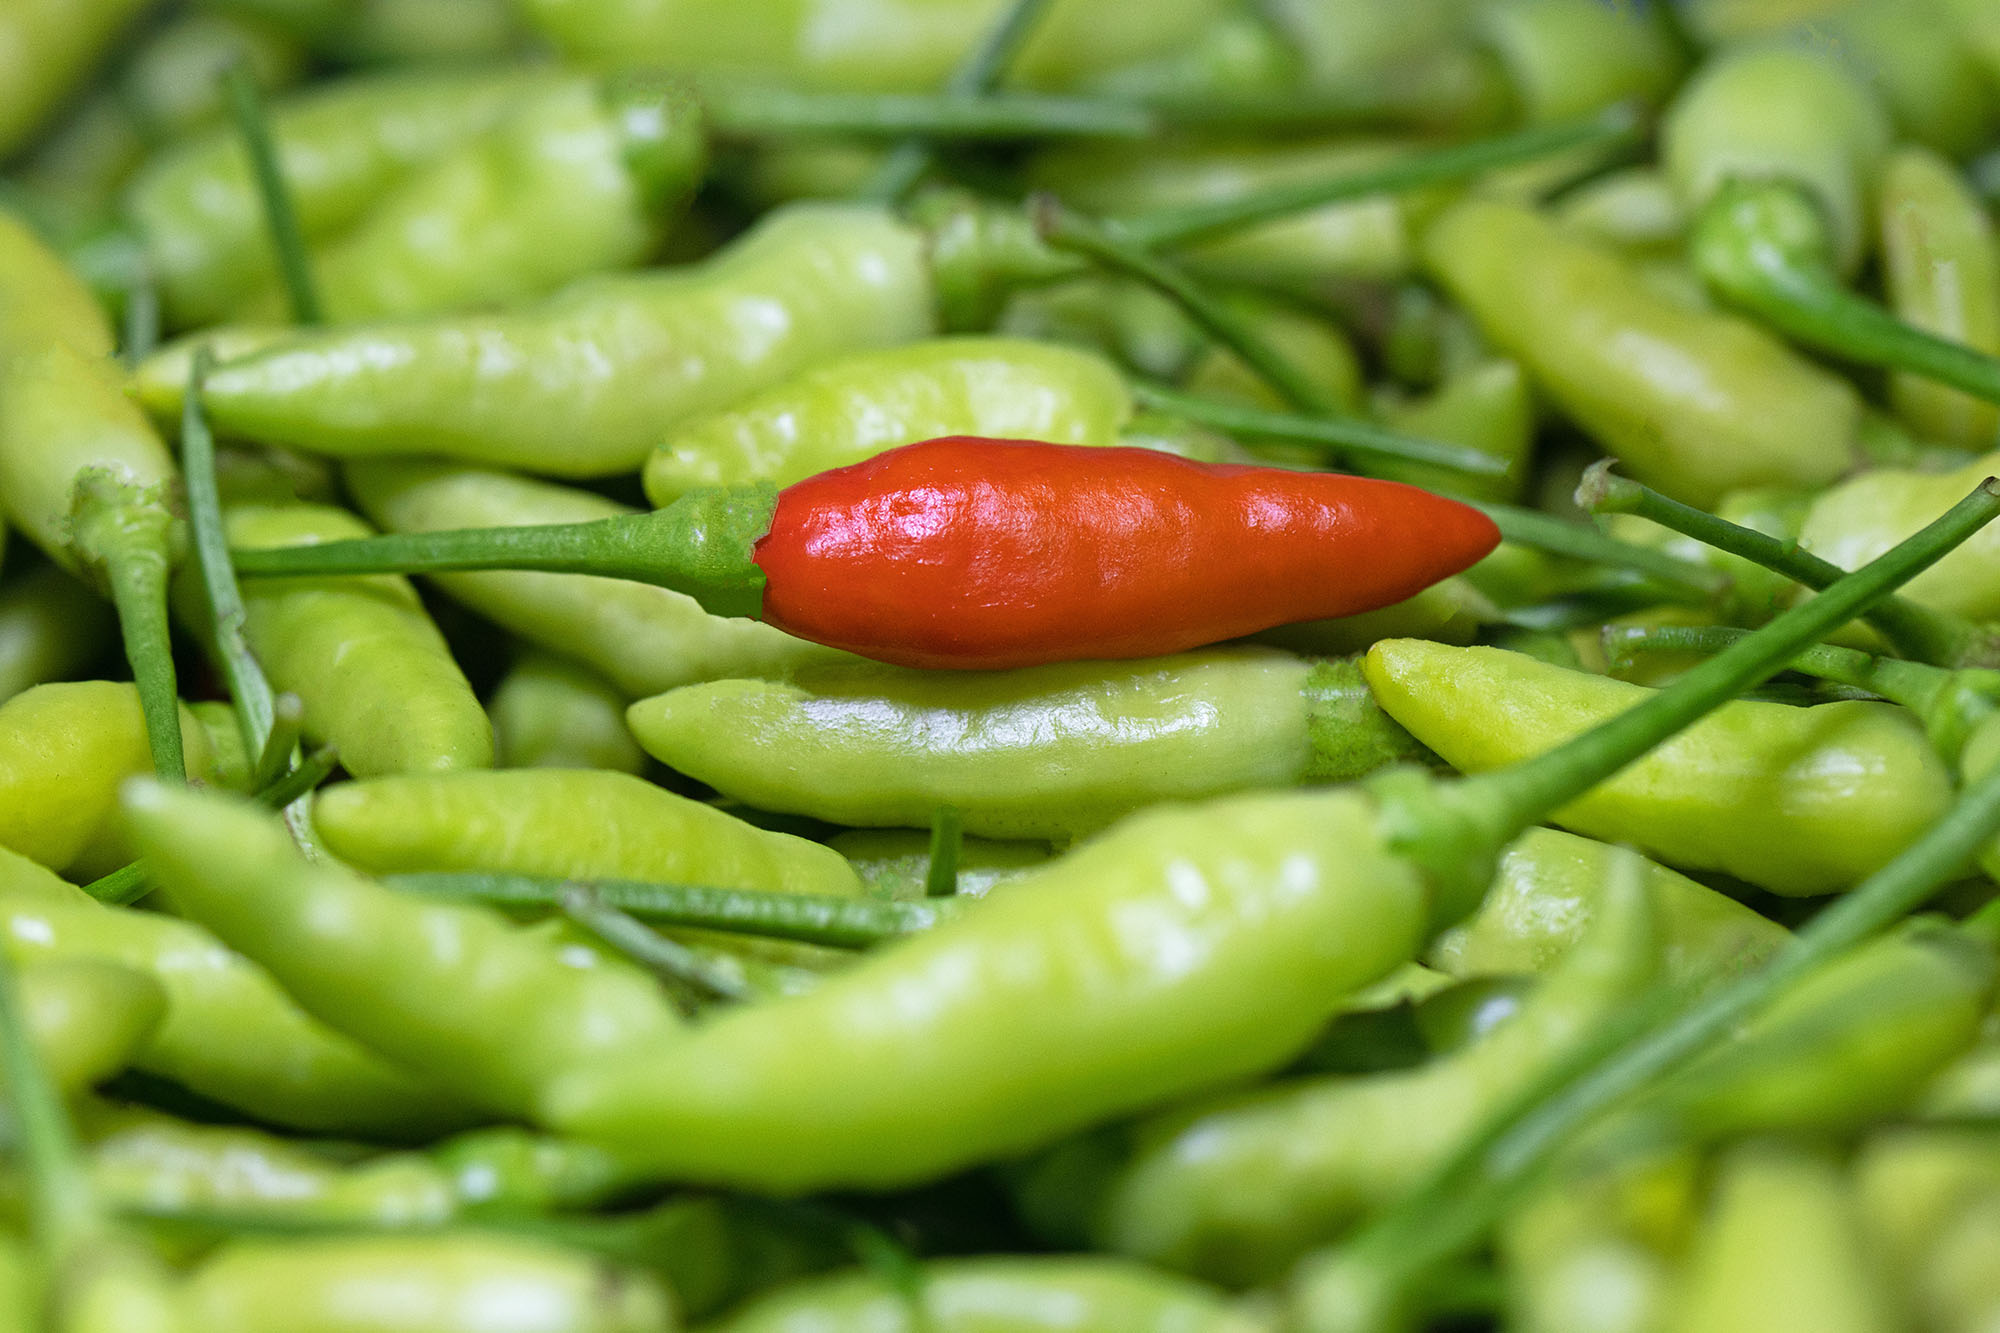 A pile of green chili peppers with one red chili pepper in the center. The image was obtained from Unsplash at https://unsplash.com/photos/8kXmfhcWHEk